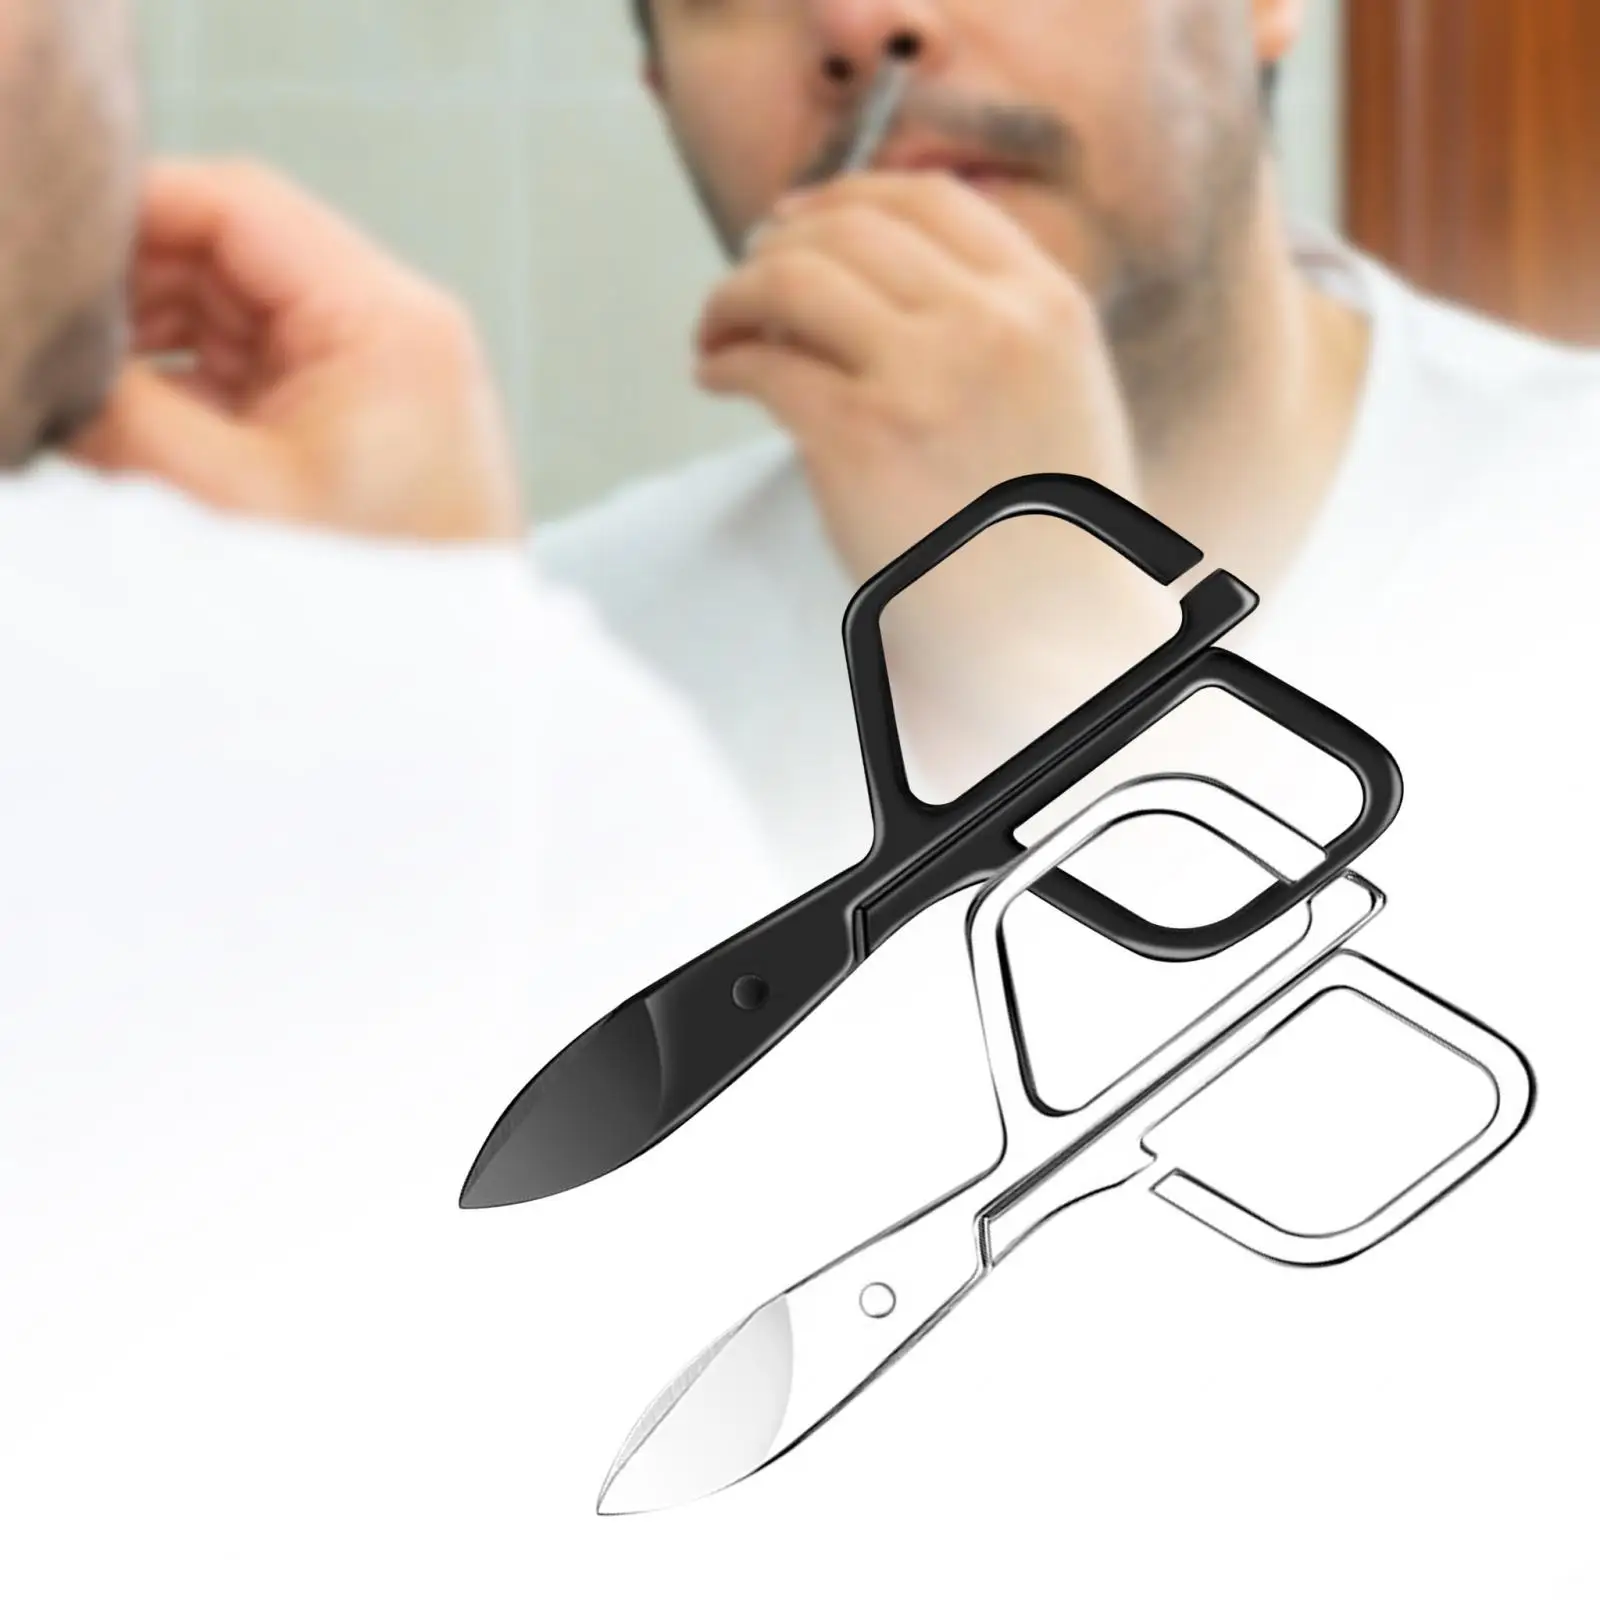 Nose Hair Scissors 9.4x4.7cm Practical Professional Grooming Scissors for Eyebrow Trimming Mustache Beard Ear Trimming Eyelashes